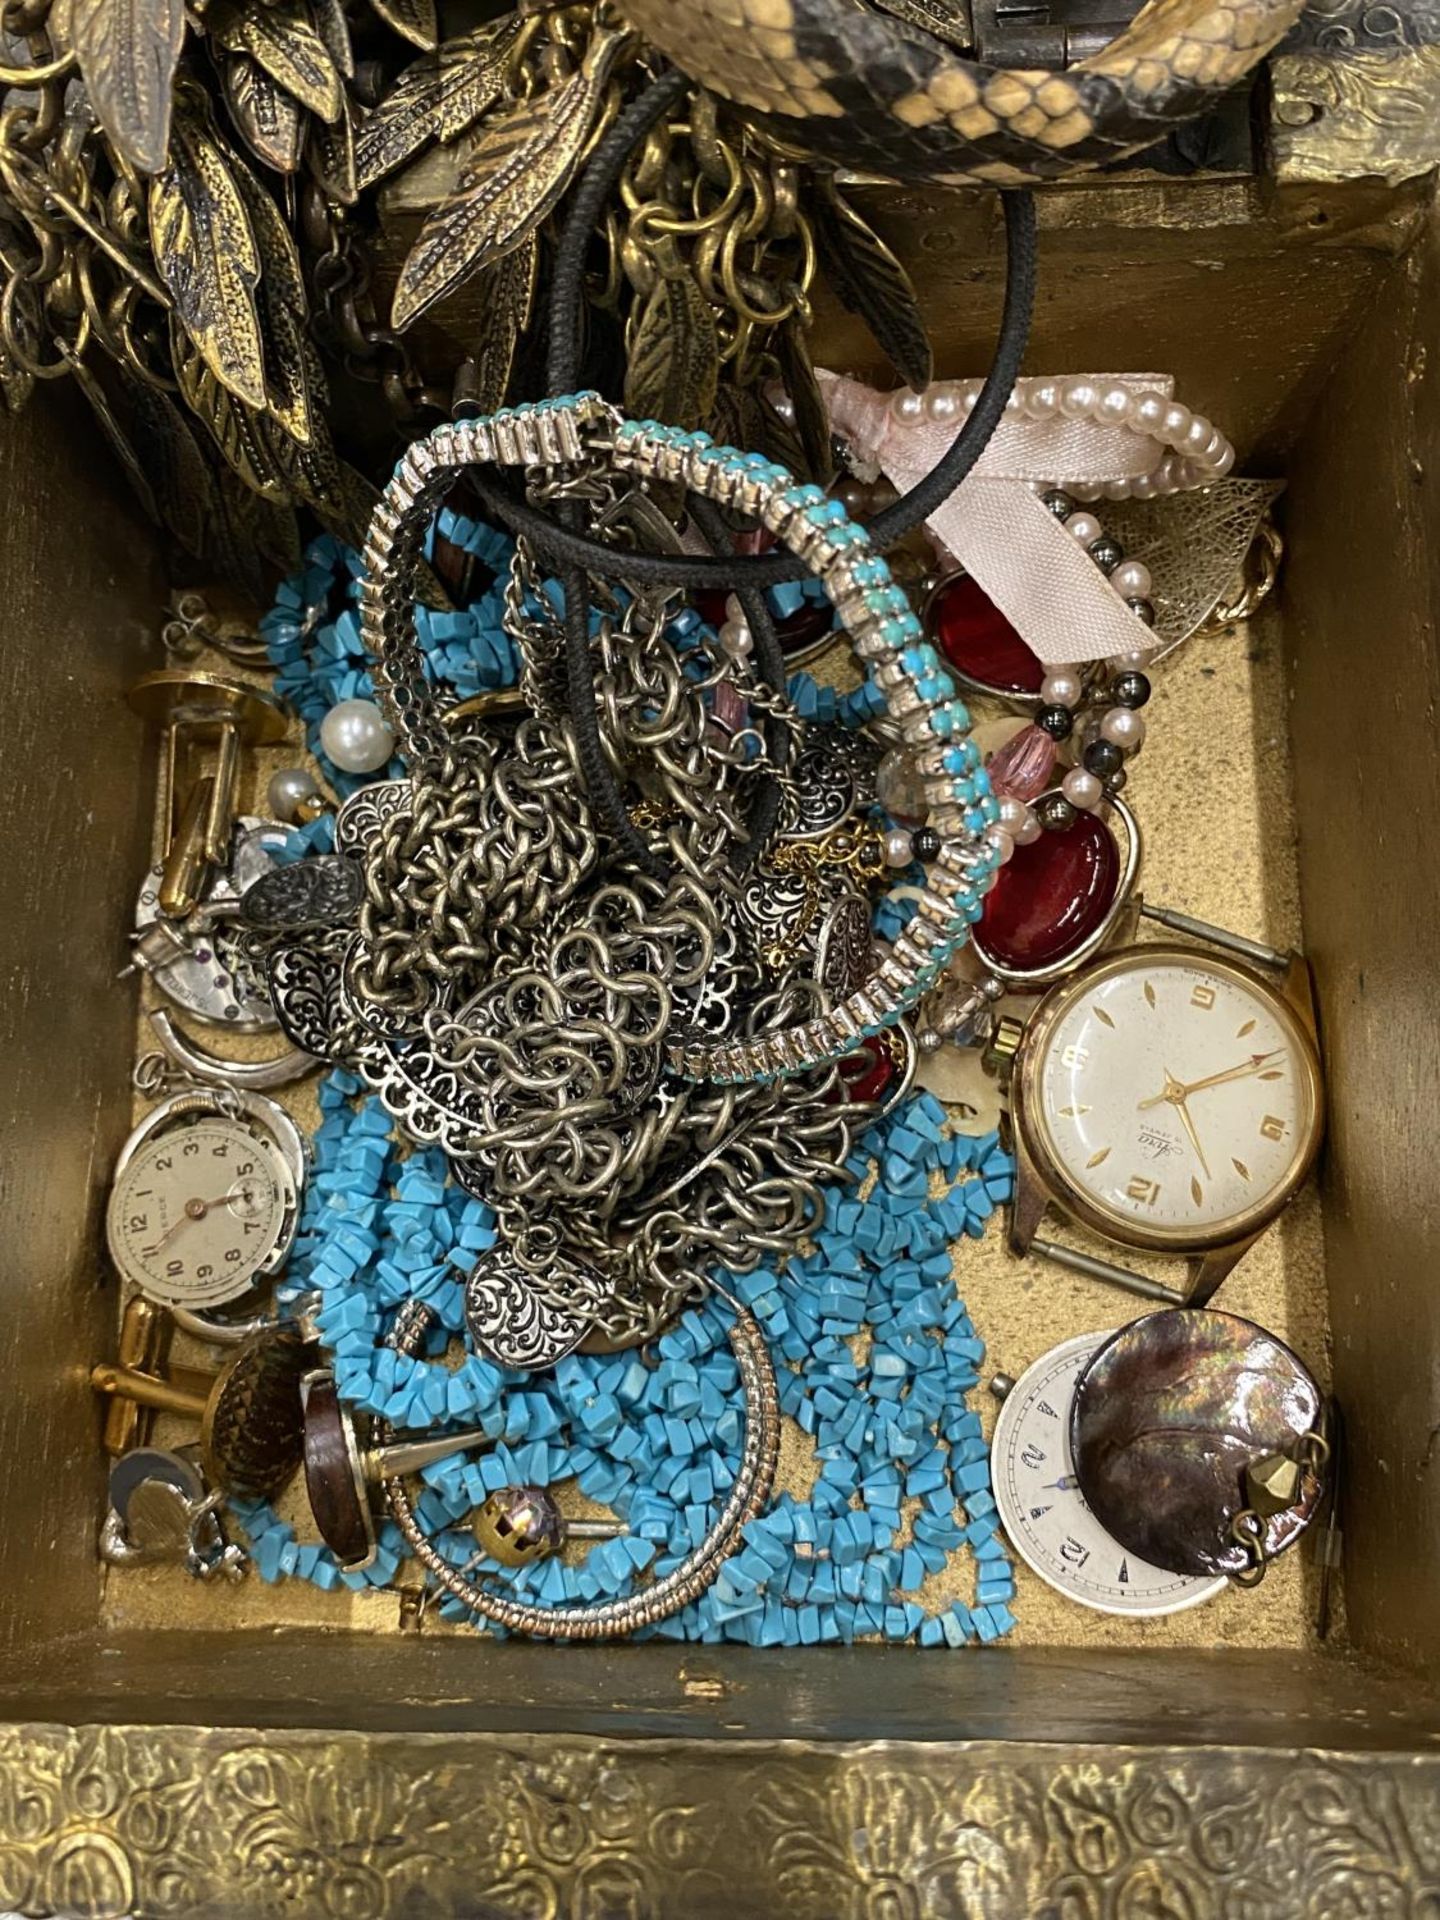 A QUANTITY OF COSTUME JEWELLERY TO INCLUDE BANGLES, BRACELETS, NECKLACES, ETC IN A WOOD AND METAL - Image 2 of 3